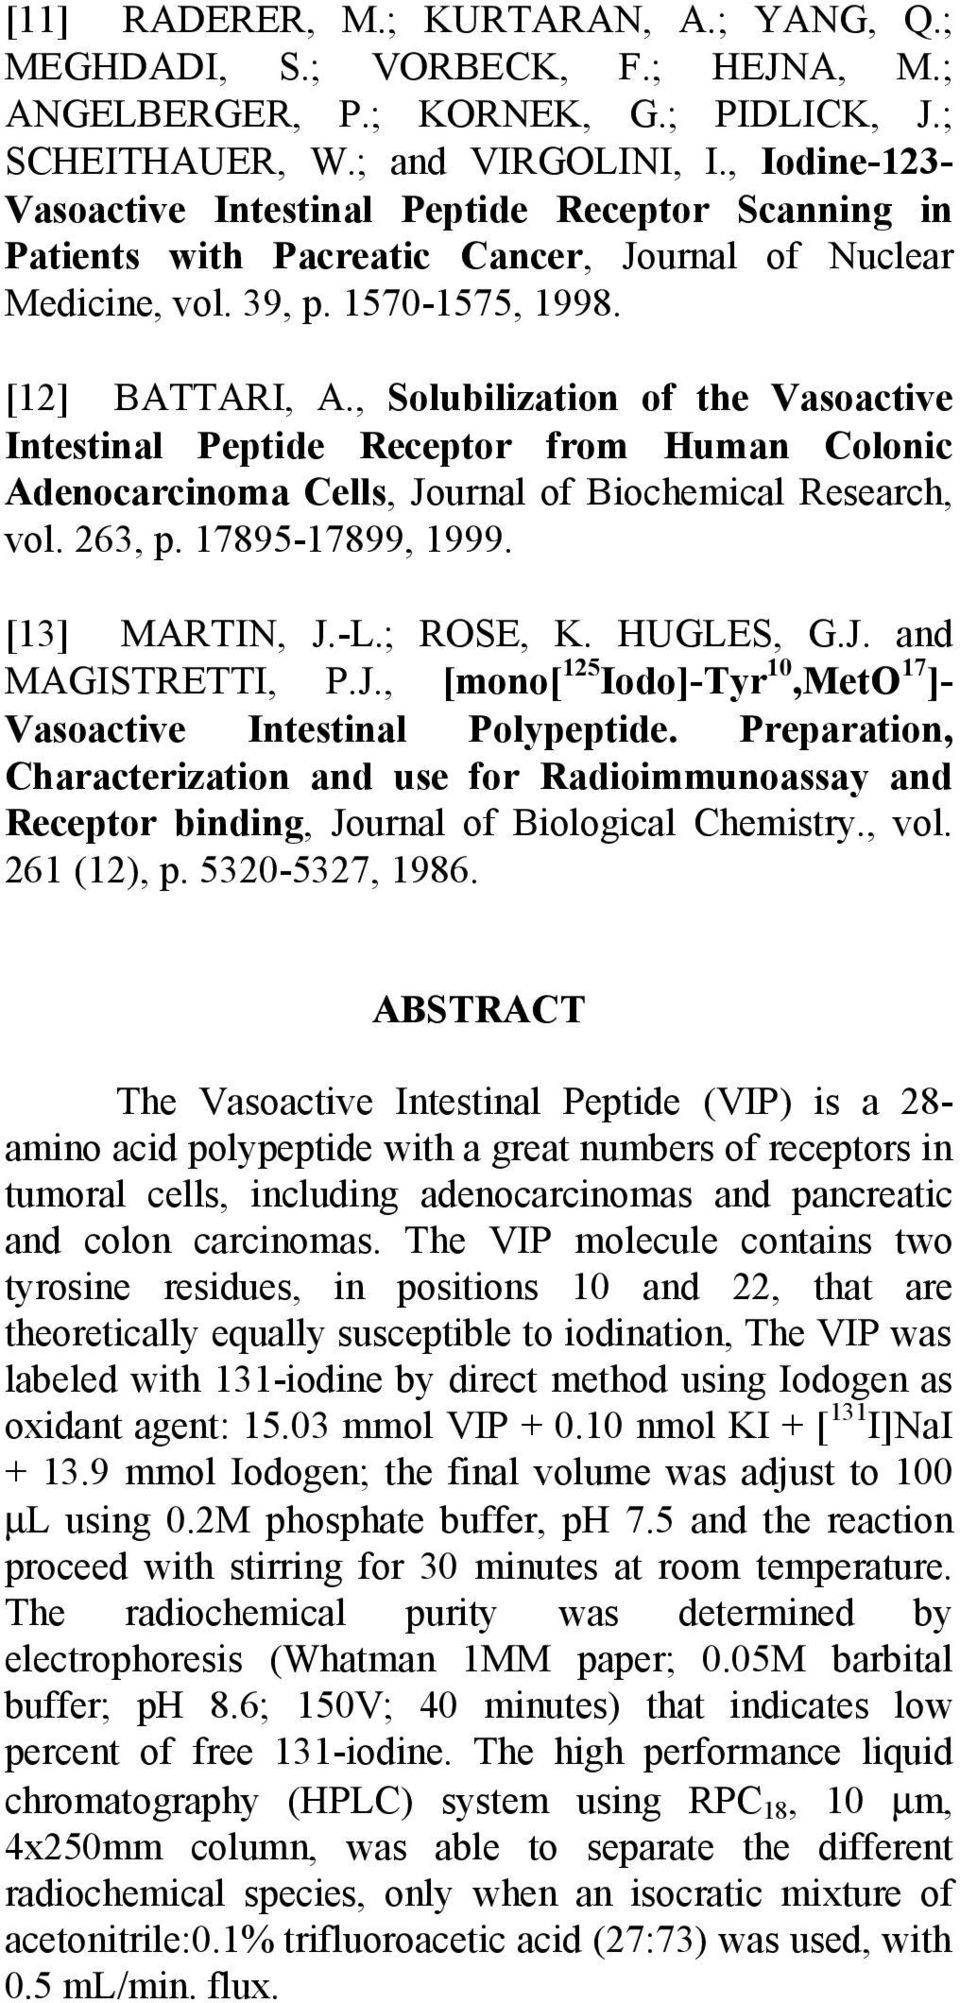 , Solubilization of the Vasoactive Intestinal Peptide Receptor from Human Colonic Adenocarcinoma Cells, Journal of Biochemical Research, vol. 263, p. 17895-17899, 1999. [13] MARTIN, J.-L.; ROSE, K.